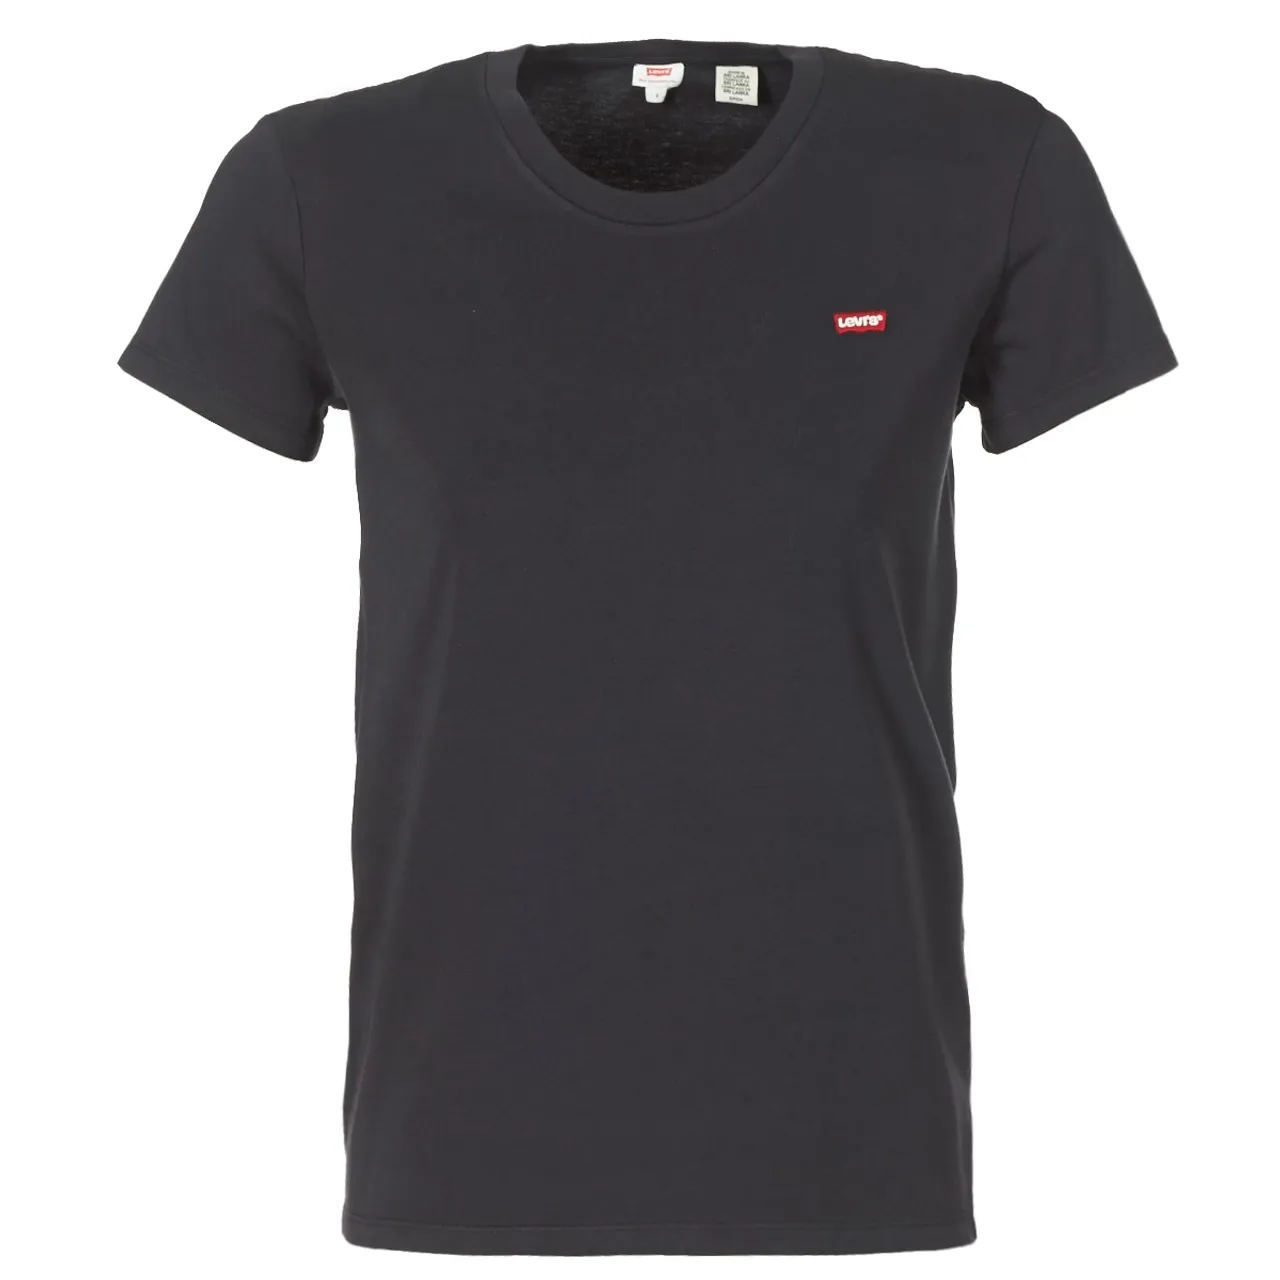 Levis  PERFECT TEE  women's T shirt in Black